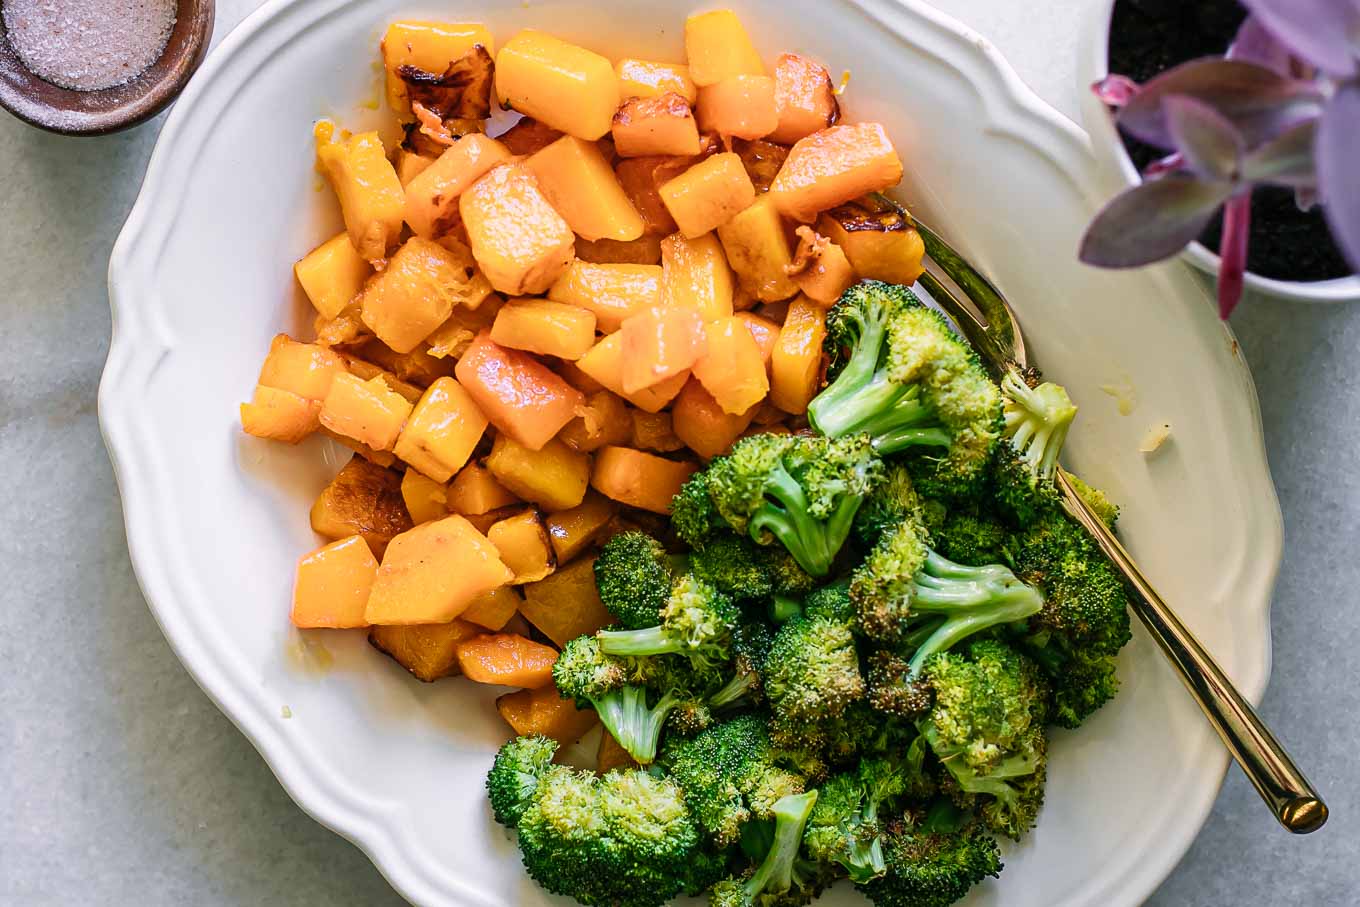 baked broccoli and butternut squash on a white plate with a gold fork